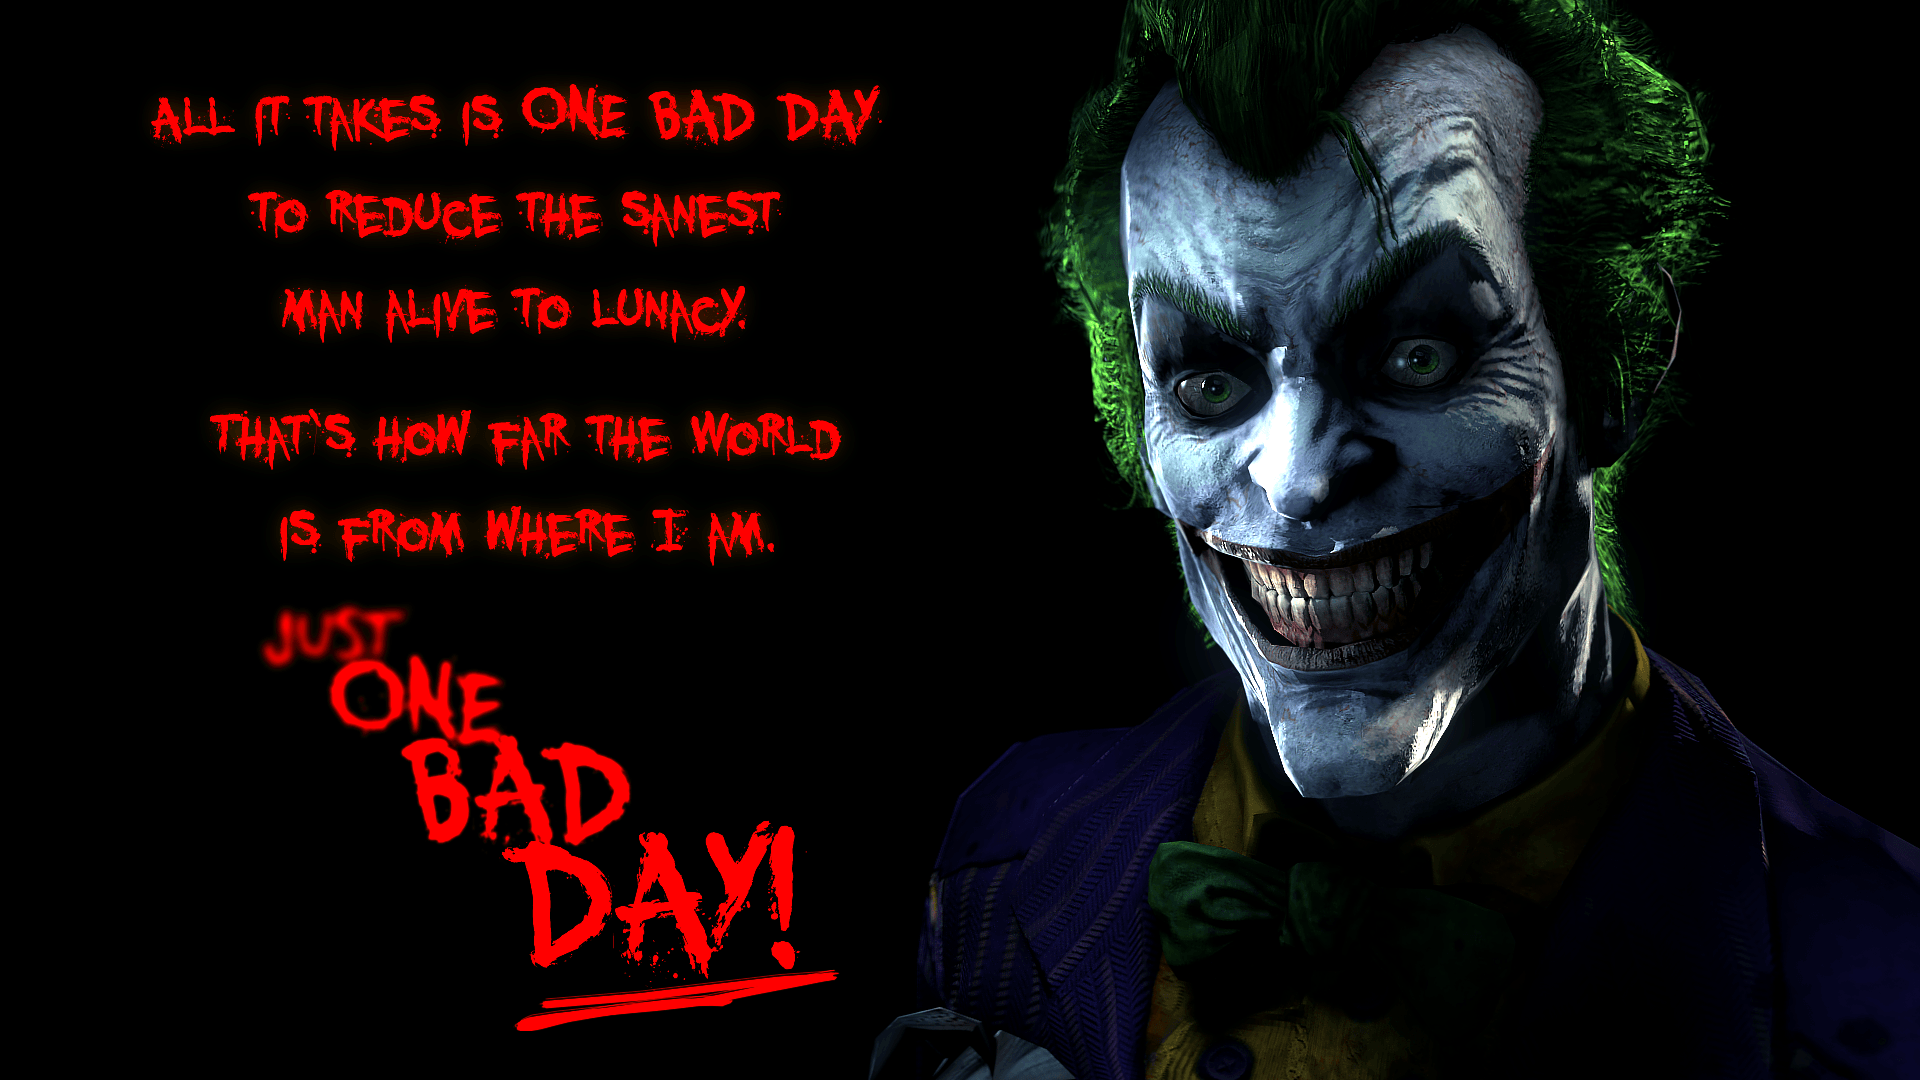 Harley Quinn and Joker Quotes Wallpaper Free Harley Quinn and Joker Quotes Background